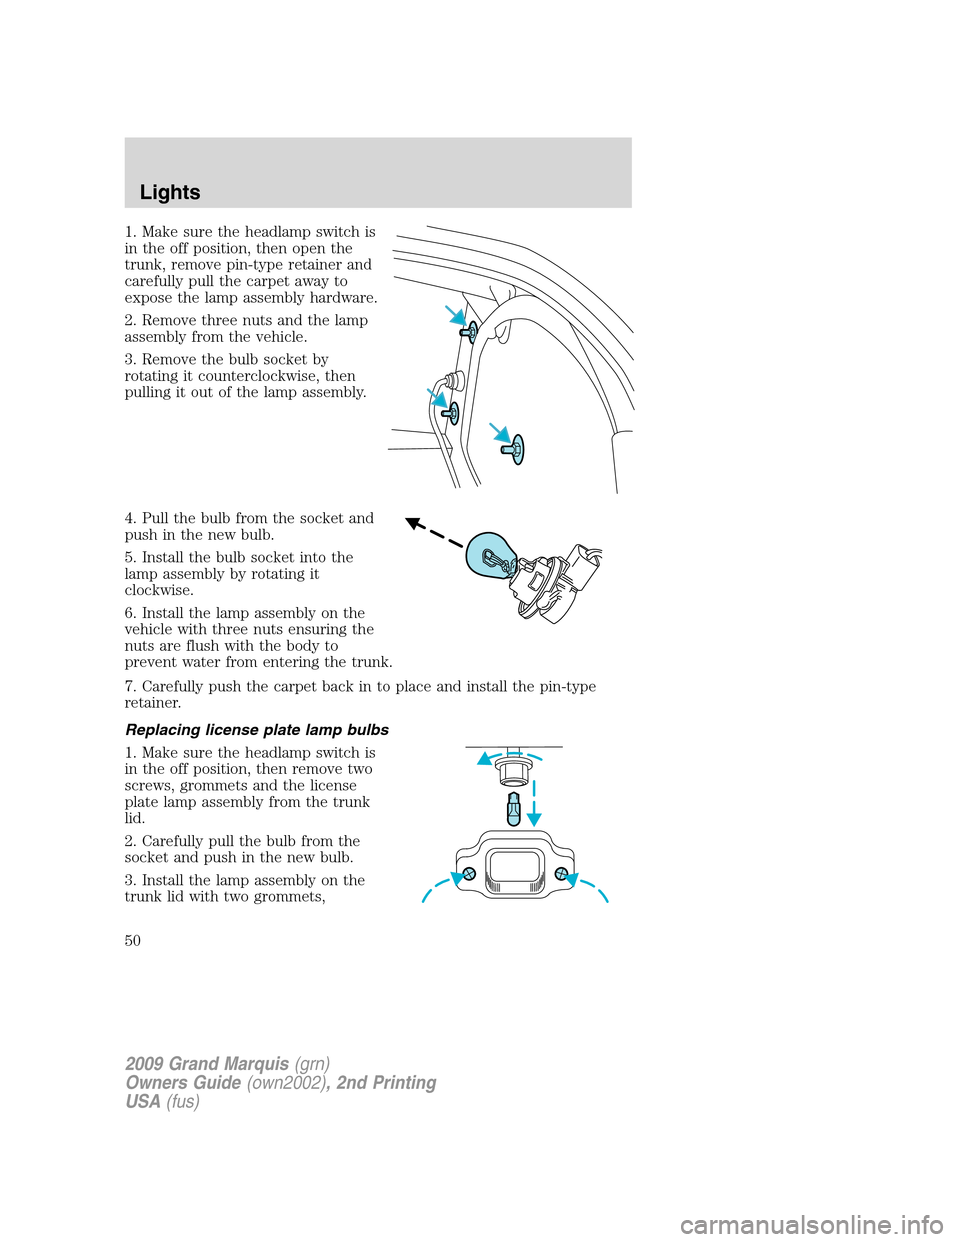 Mercury Grand Marquis 2009  s Service Manual 1. Make sure the headlamp switch is
in the off position, then open the
trunk, remove pin-type retainer and
carefully pull the carpet away to
expose the lamp assembly hardware.
2. Remove three nuts and